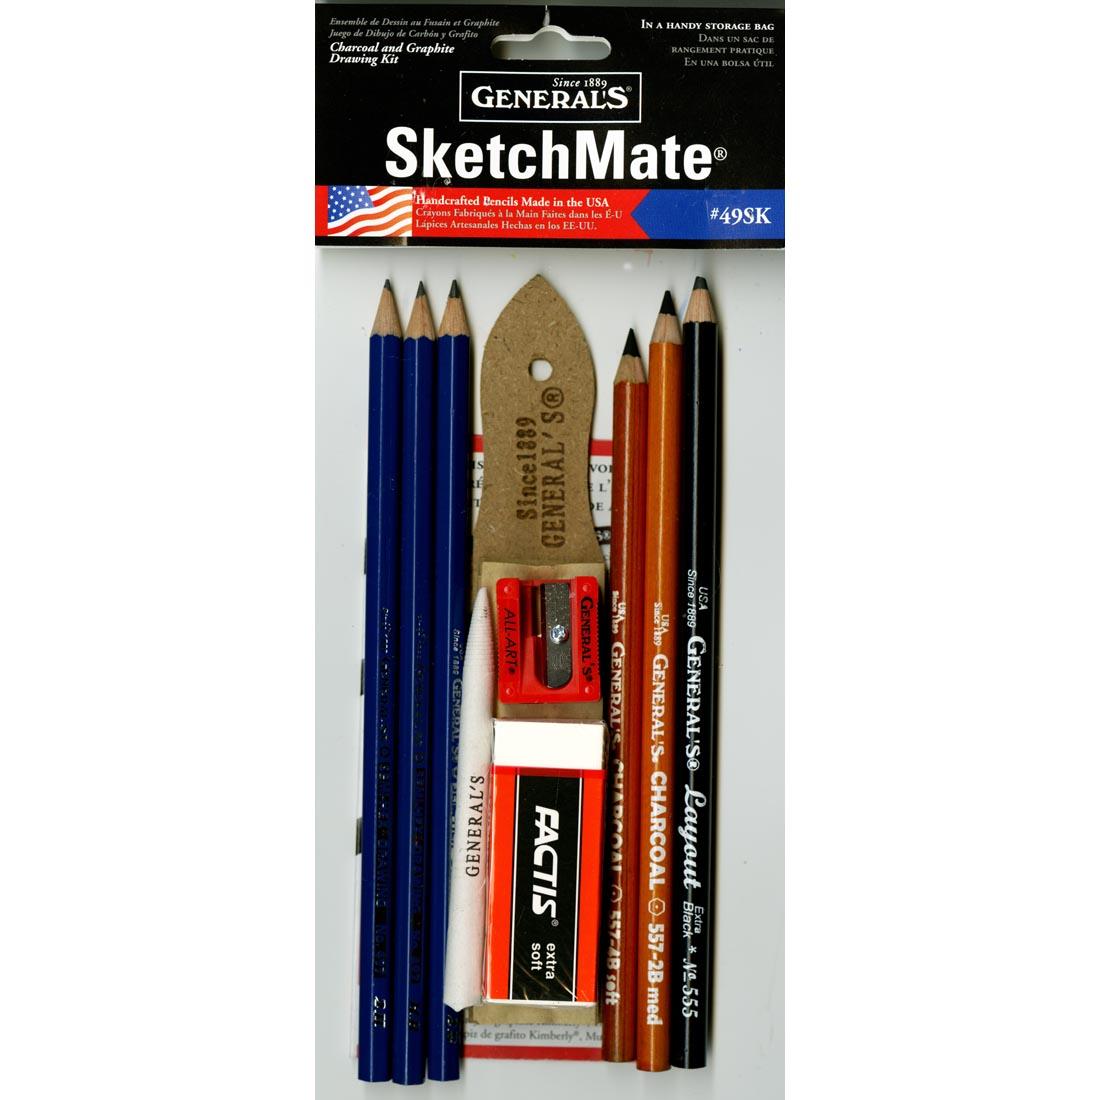 General's SketchMate Charcoal & Graphite Drawing Kit